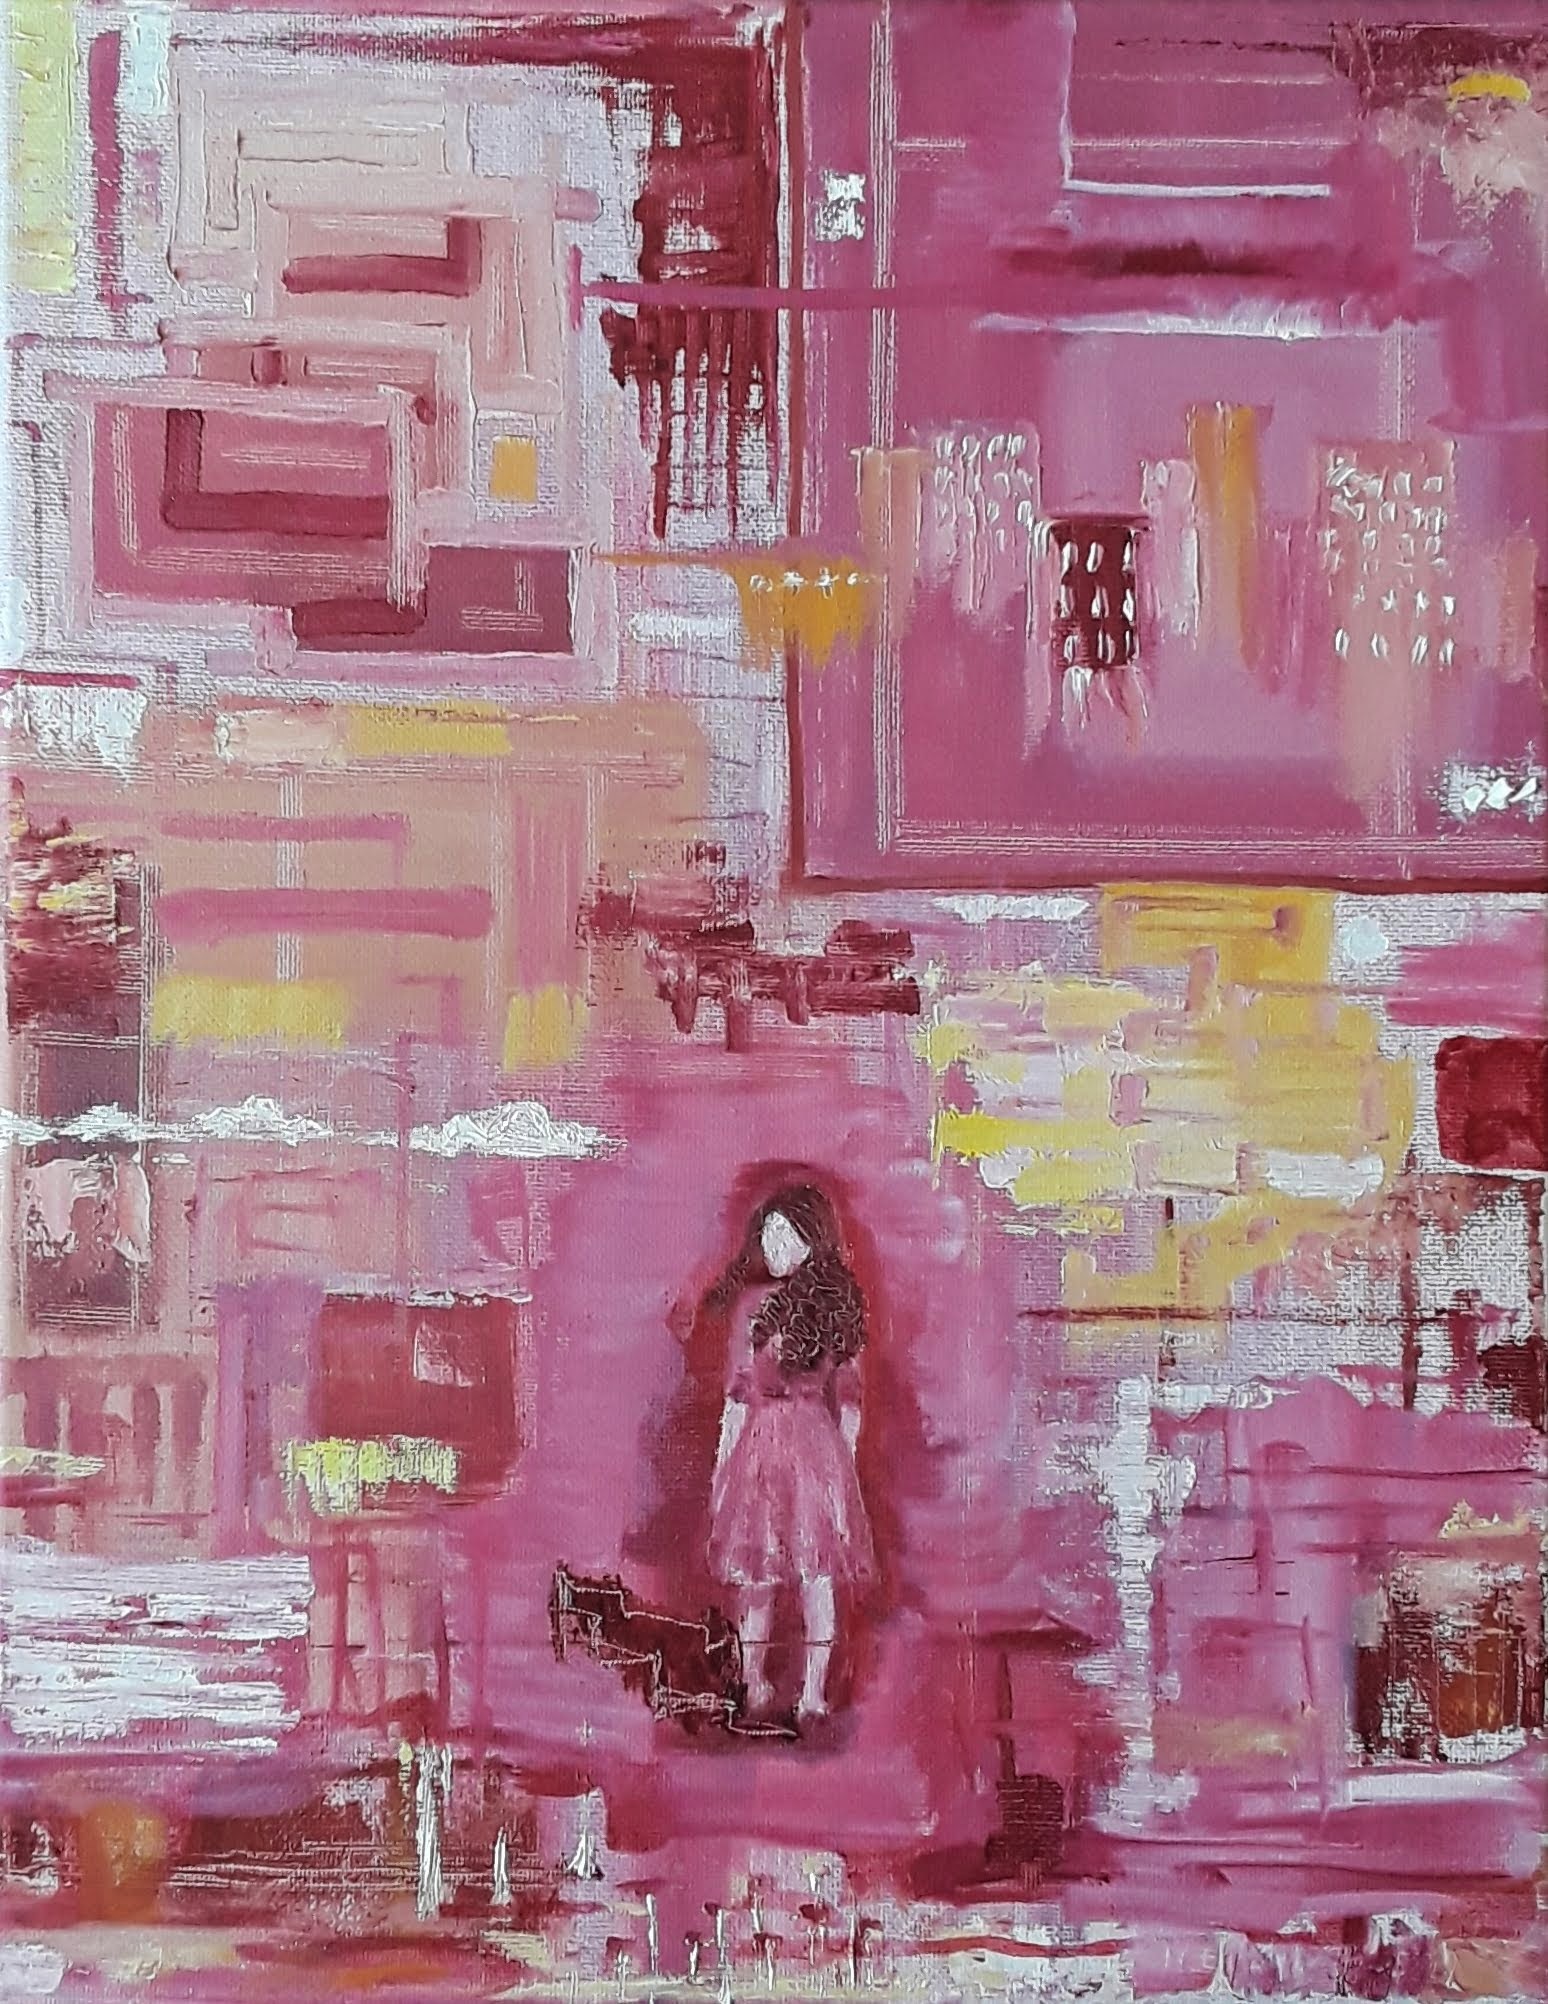 Painting with pink, white, and yellow abstract shapes. A person with brunette hair and pink dress stands in the middle, looking over the shoulder.